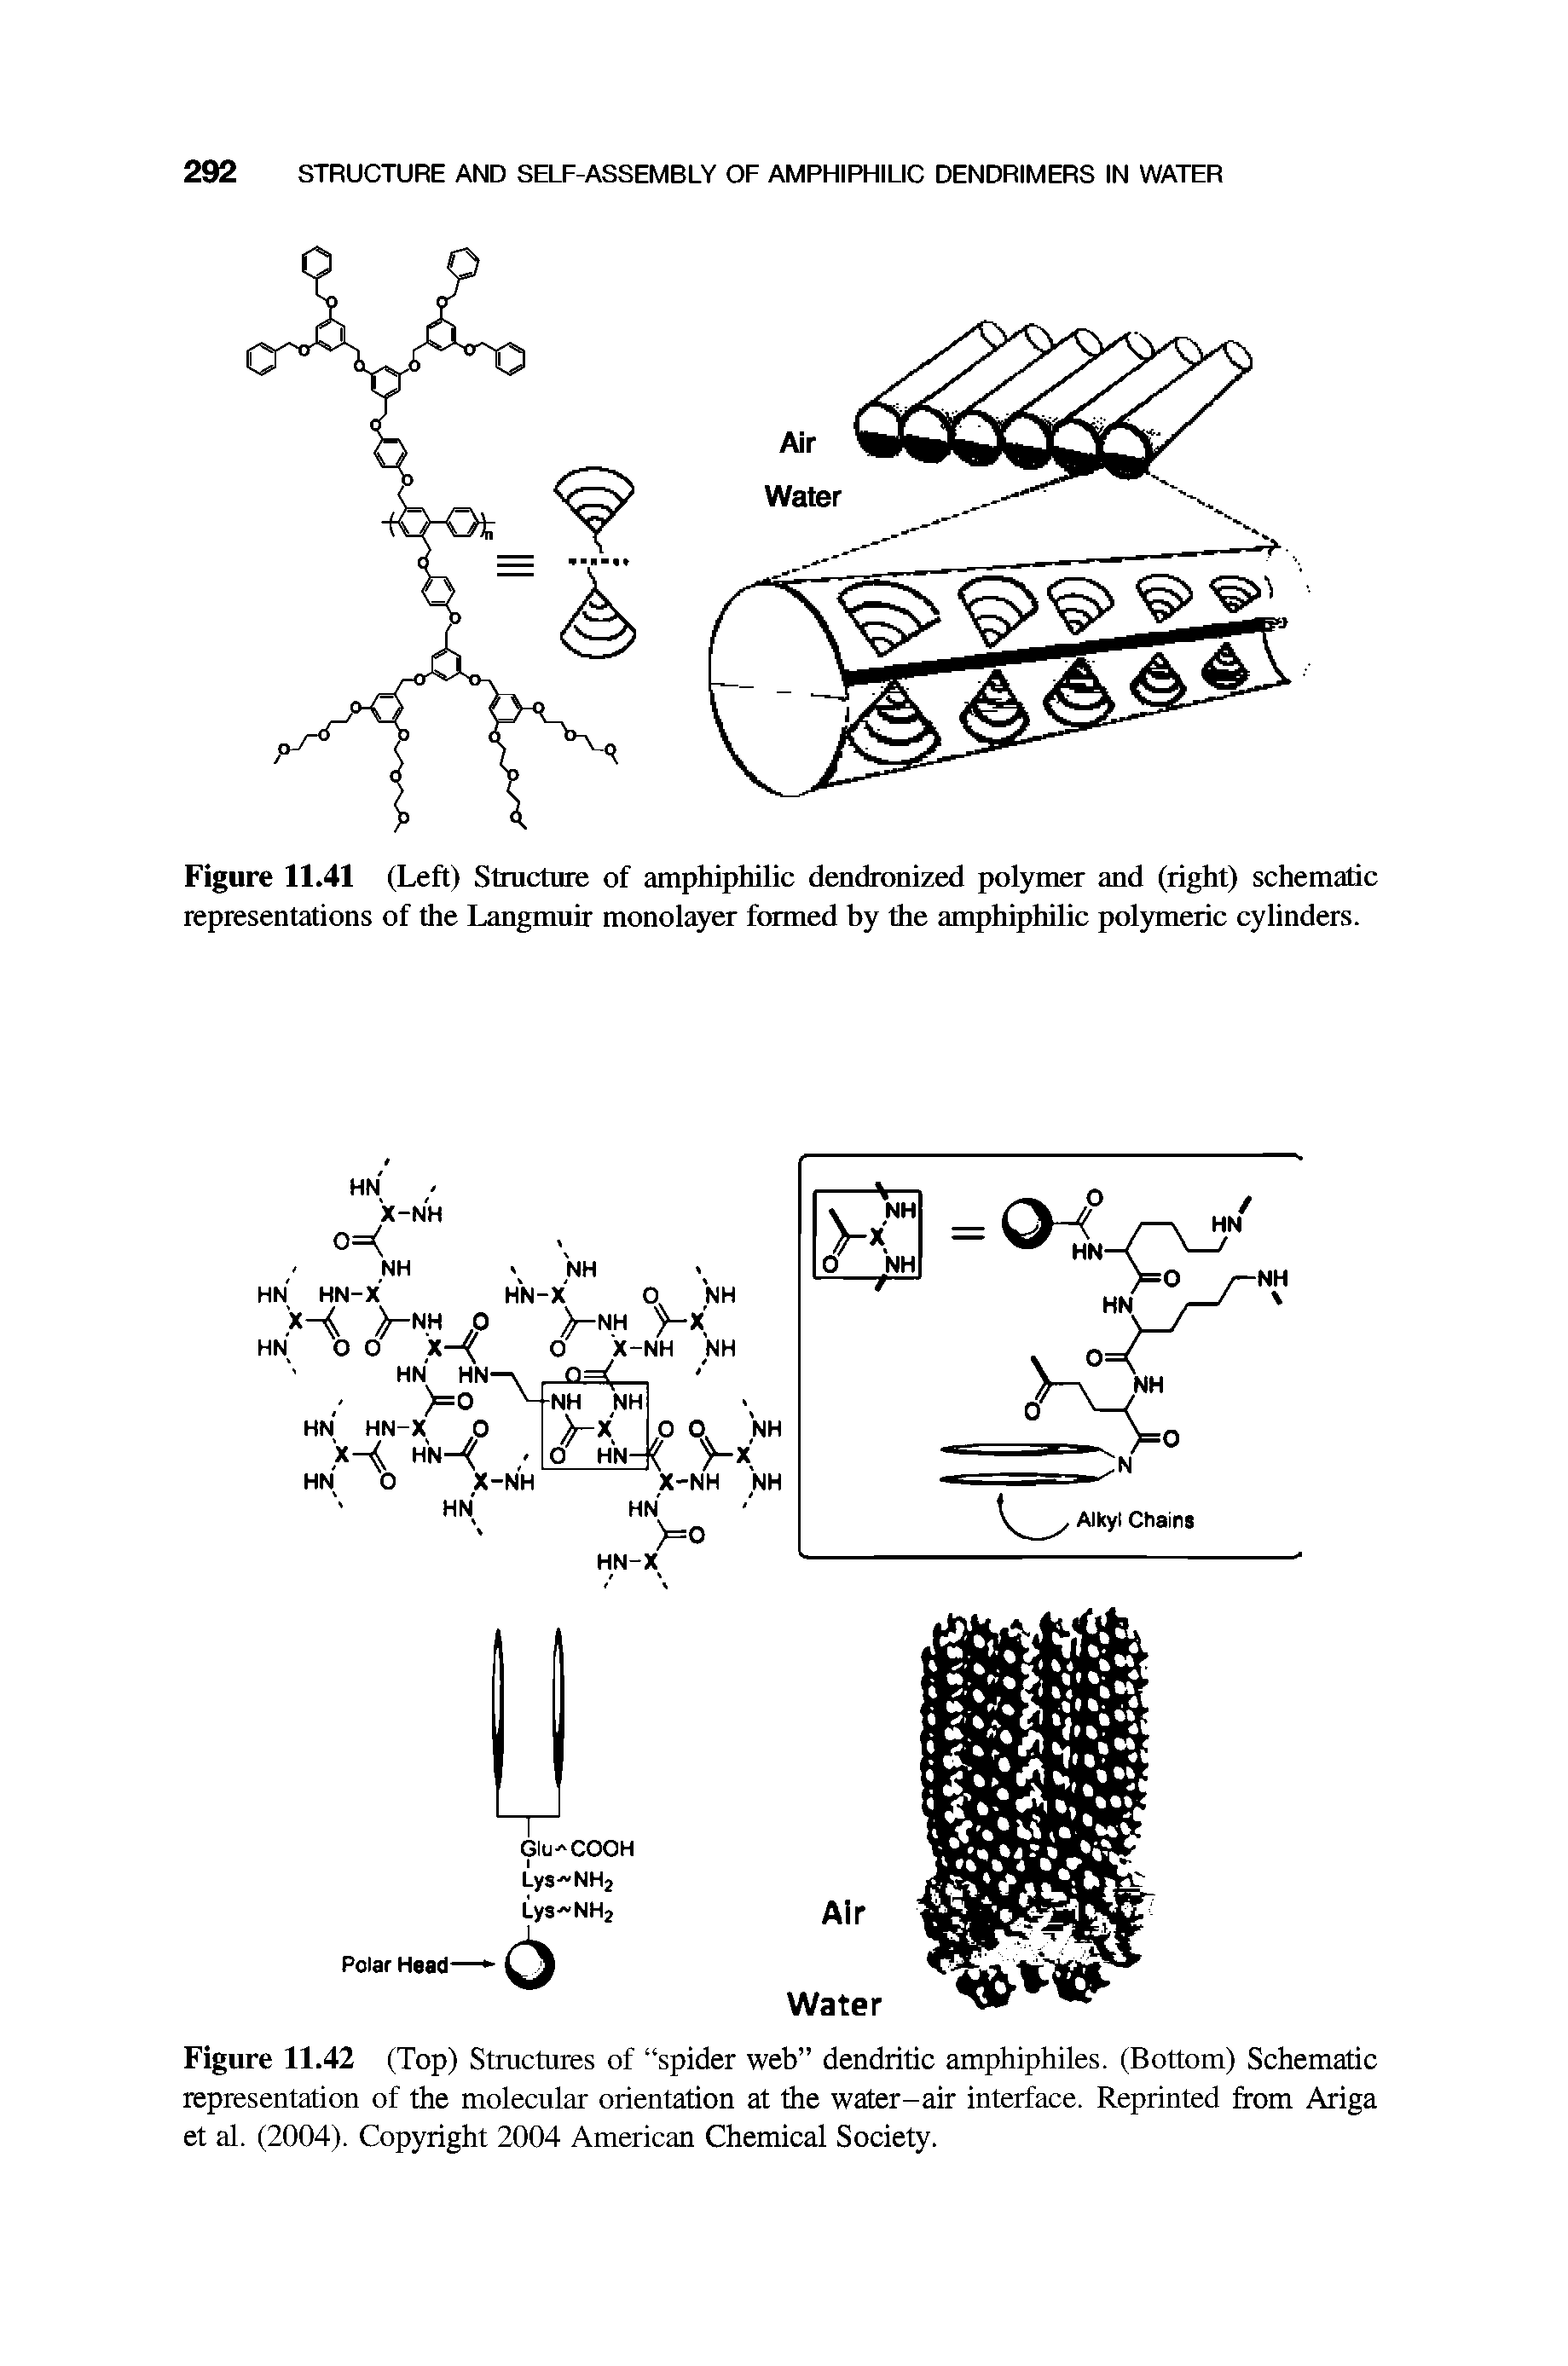 Figure 11.42 (Top) Structures of spider web dendritic amphiphiles. (Bottom) Schematic representation of the molecular orientation at the water-air interface. Reprinted from Ariga et al. (2004). Copyright 2004 American Chemical Society.